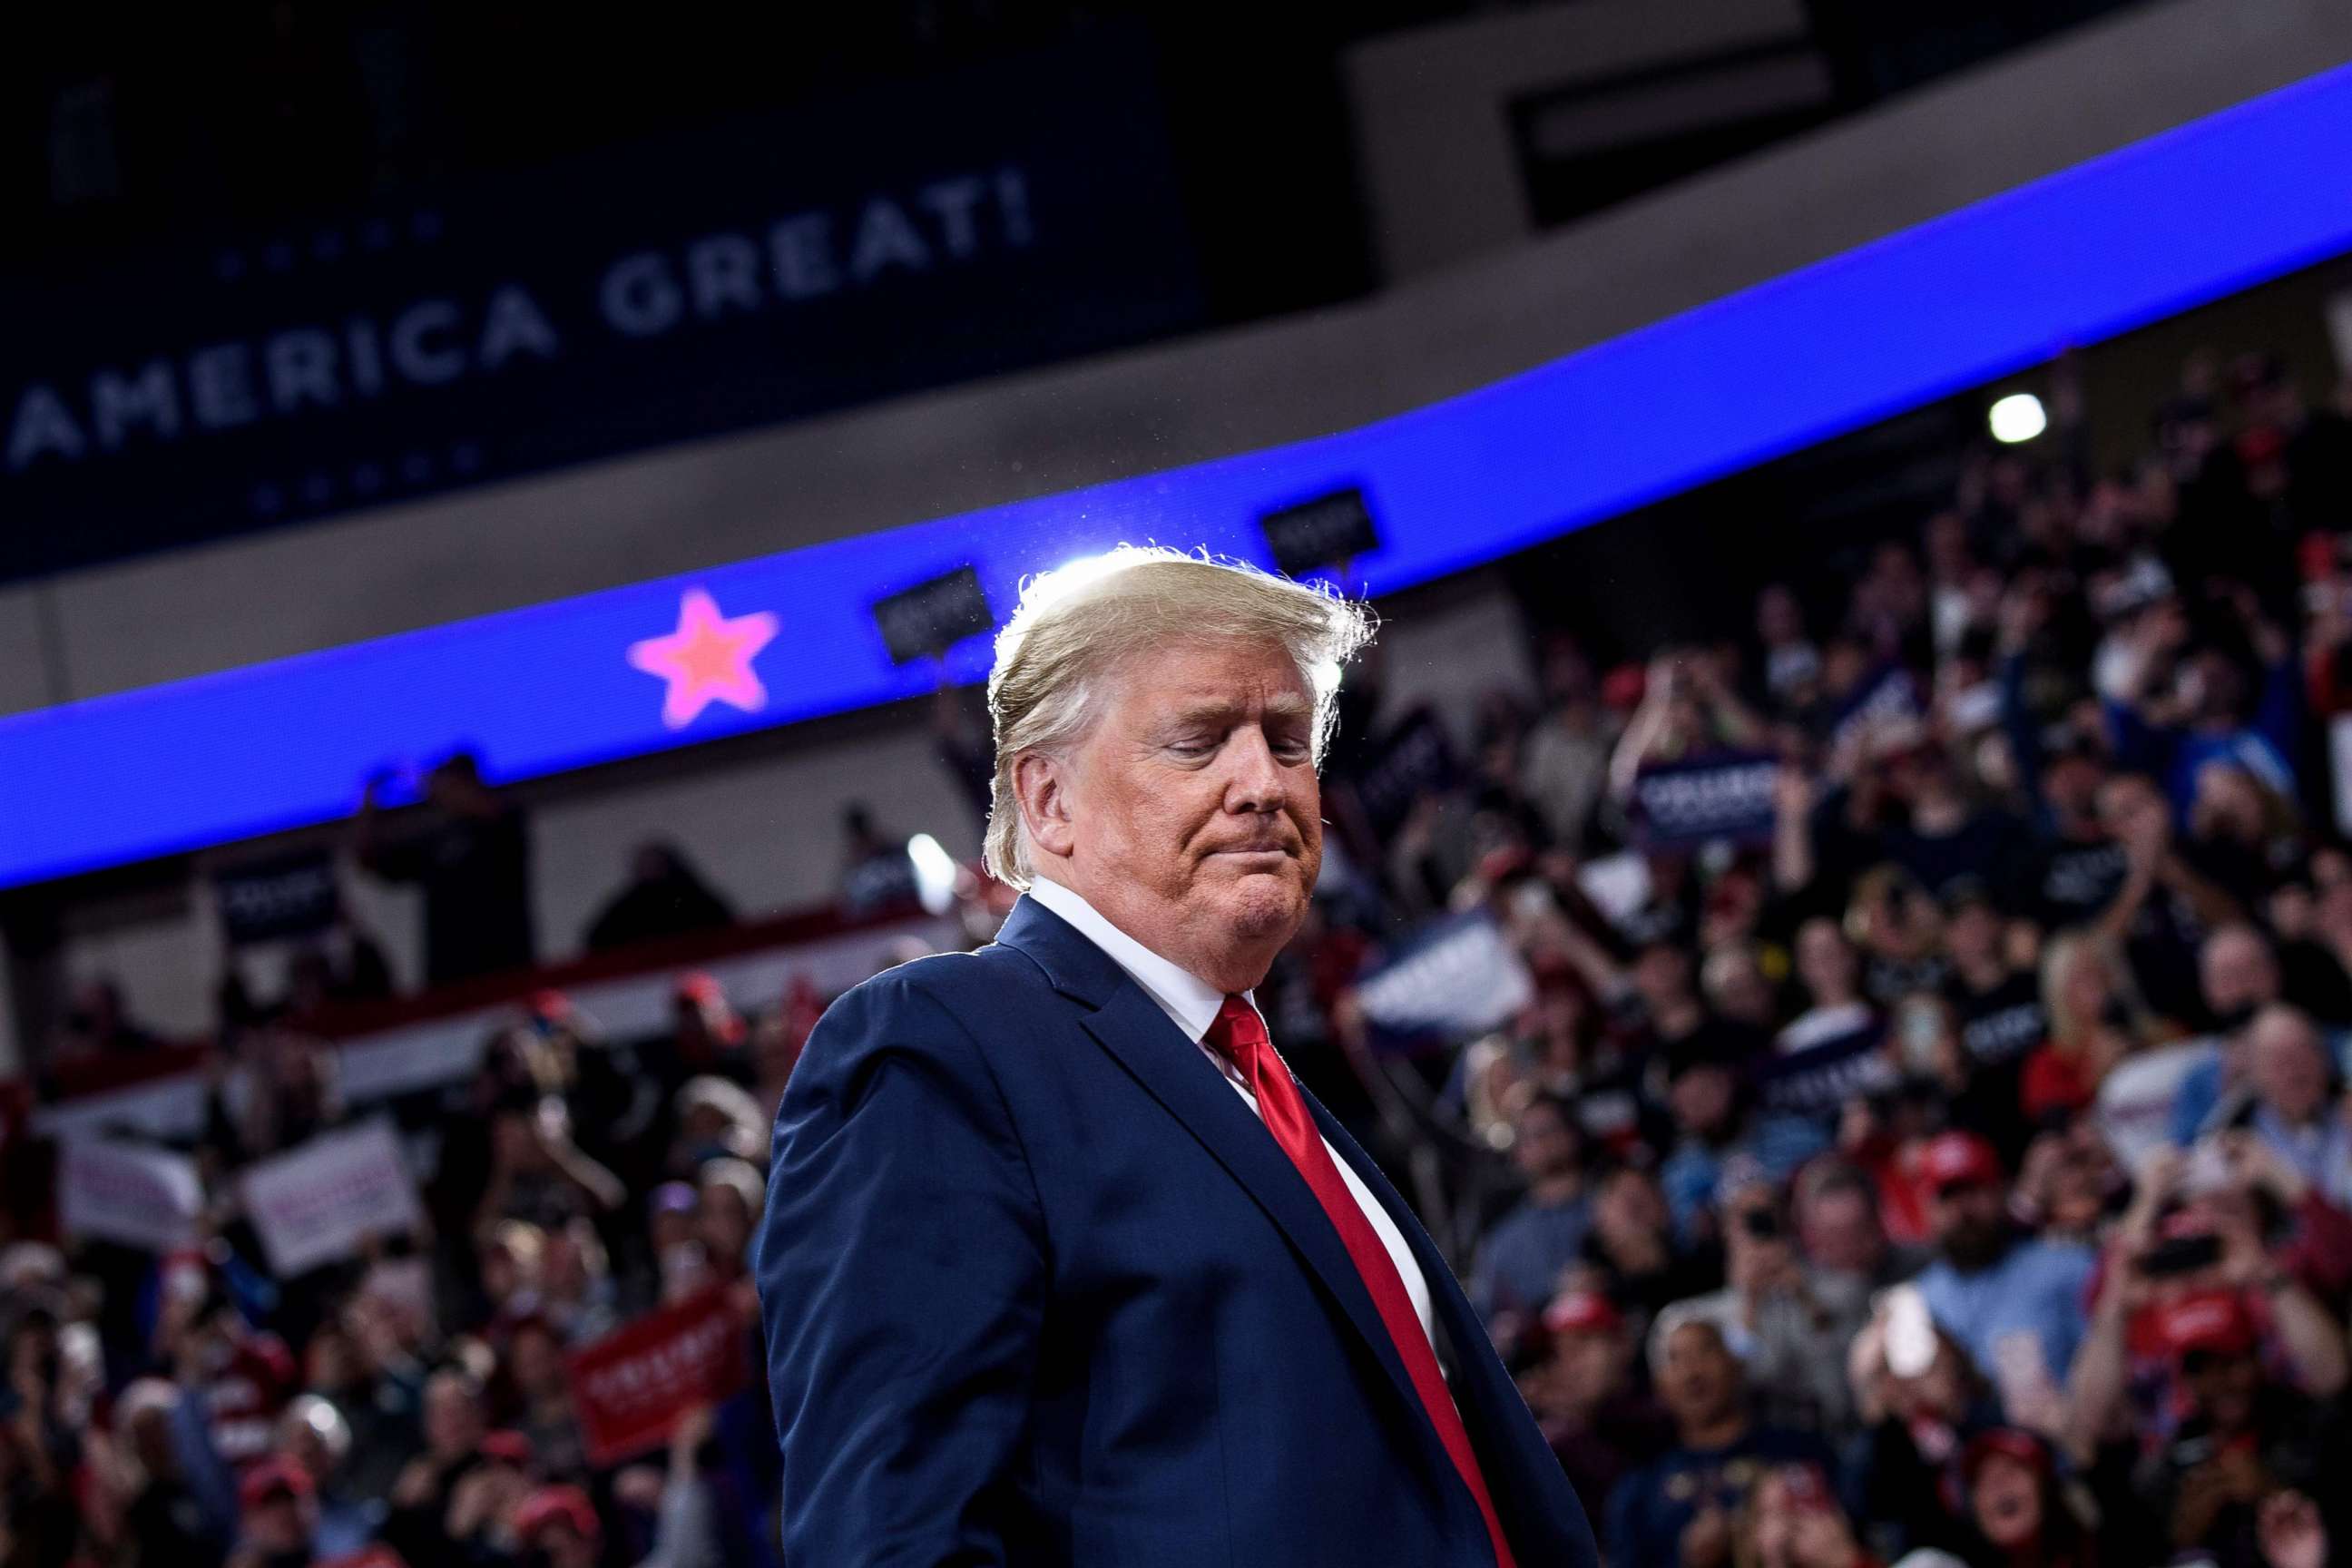 PHOTO: President Donald Trump arrives for a Keep America Great rally at the Giant Center in Hershey, Penn., Dec. 10, 2019.